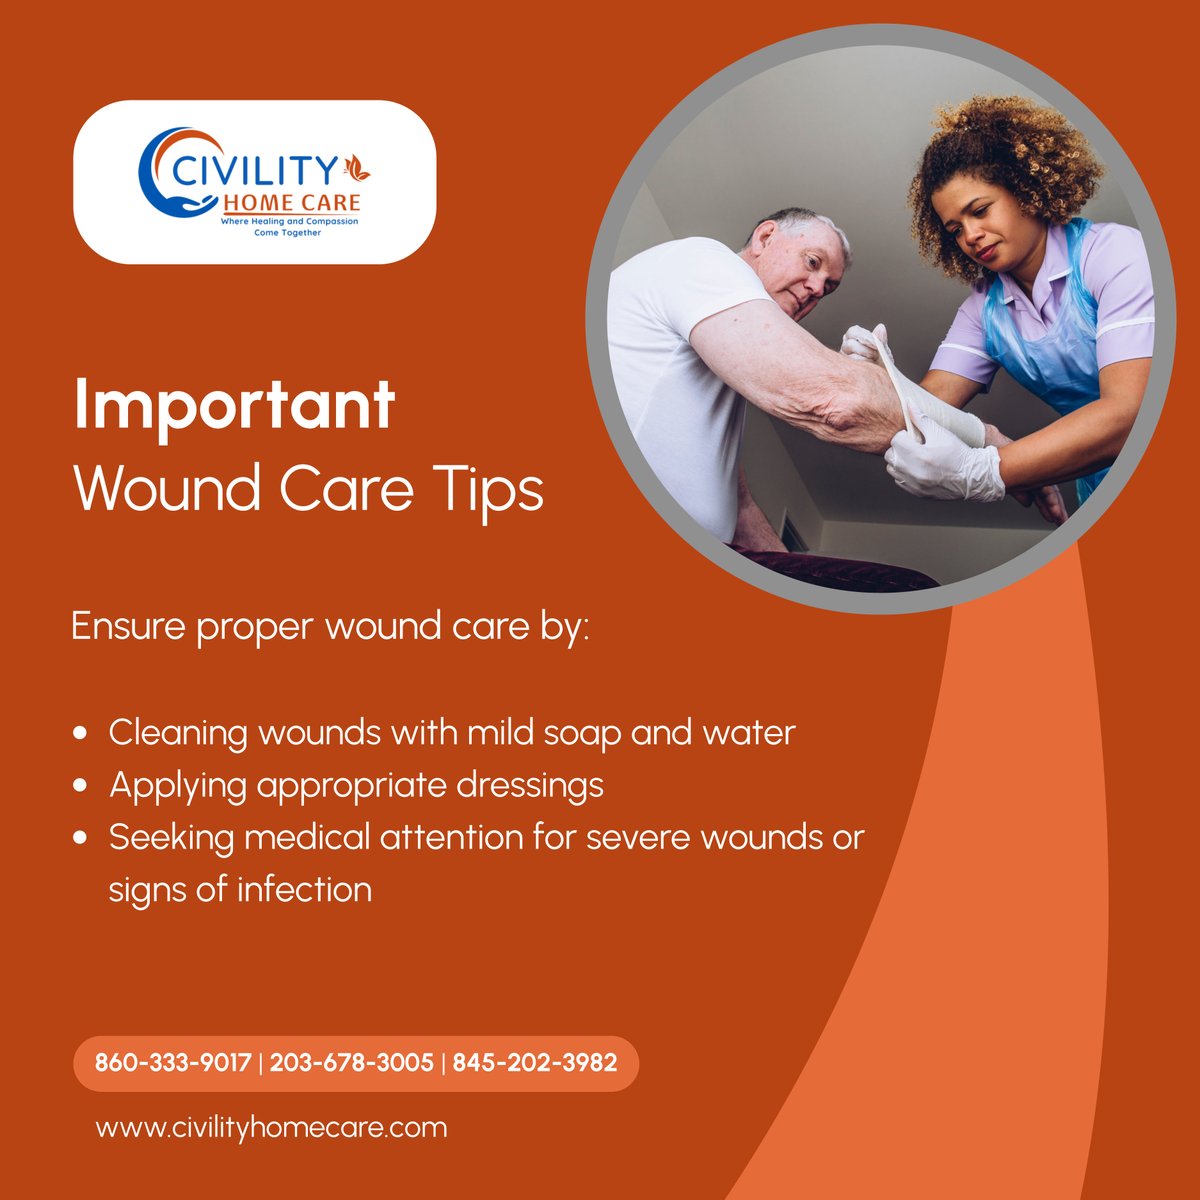 Proper wound care is essential for healing. Follow these tips to promote faster recovery and prevent complications. 

#DanburyCT #HomeCareAndMedicalSupplies #WoundCare #HealthTips #EssentialWoundHealingTips